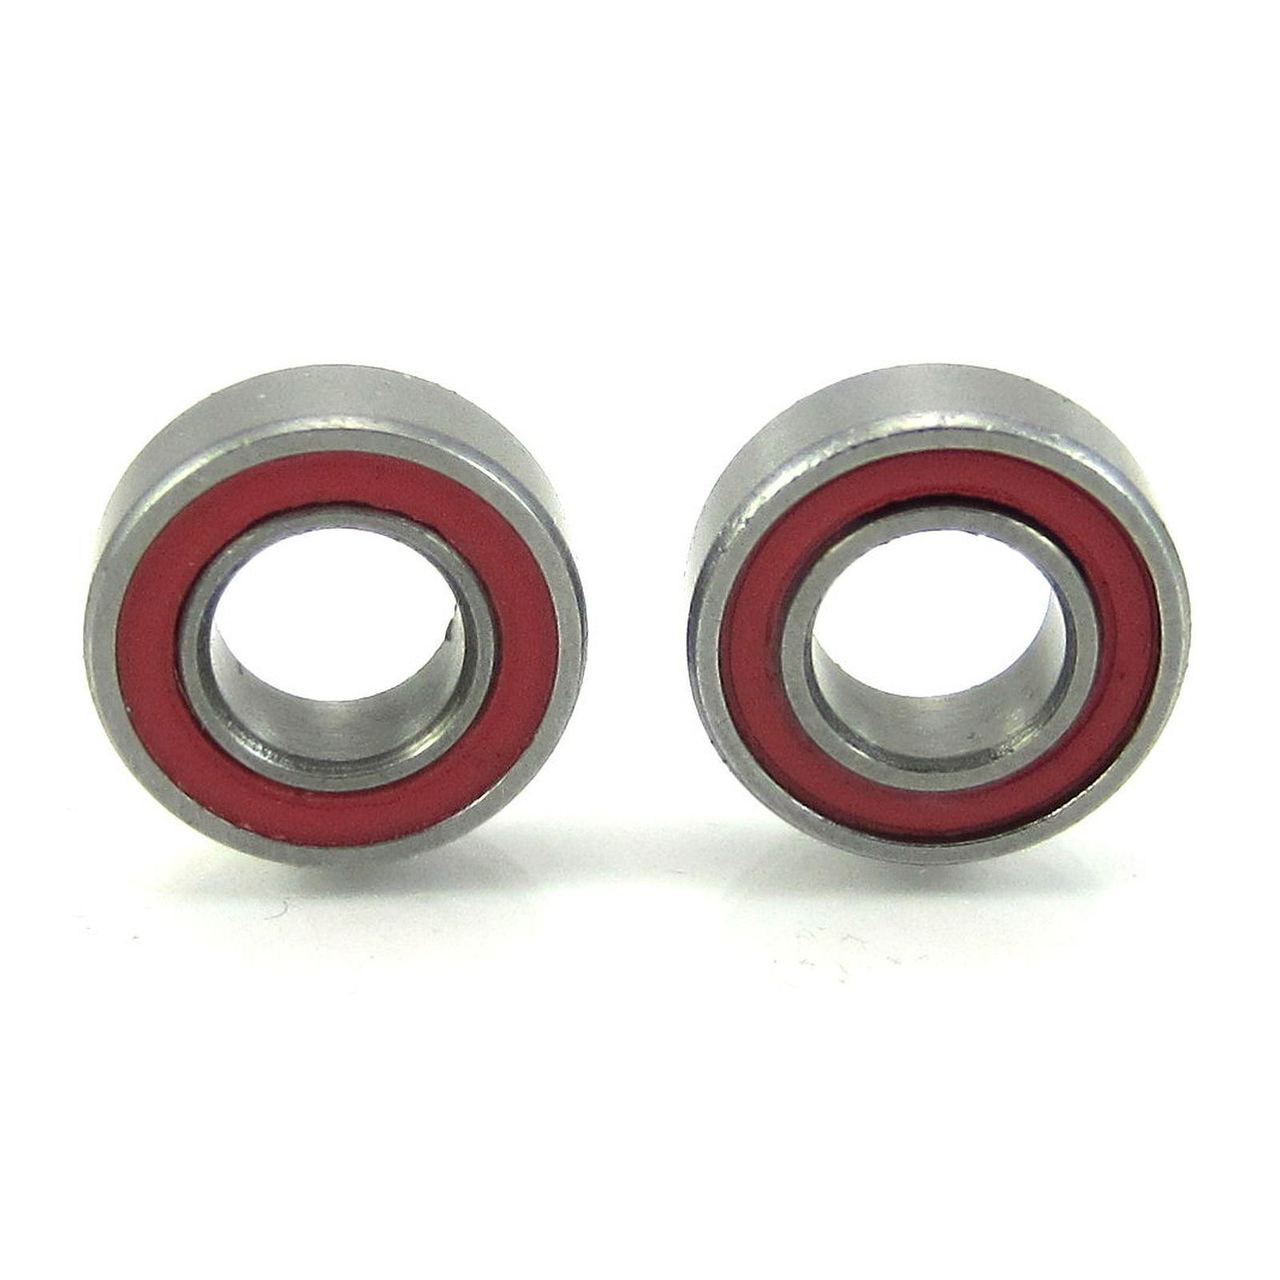 TRB RC 3/16x3/8x1/8 Precision Ceramic Ball Bearings Red Rubber Sealed (2)